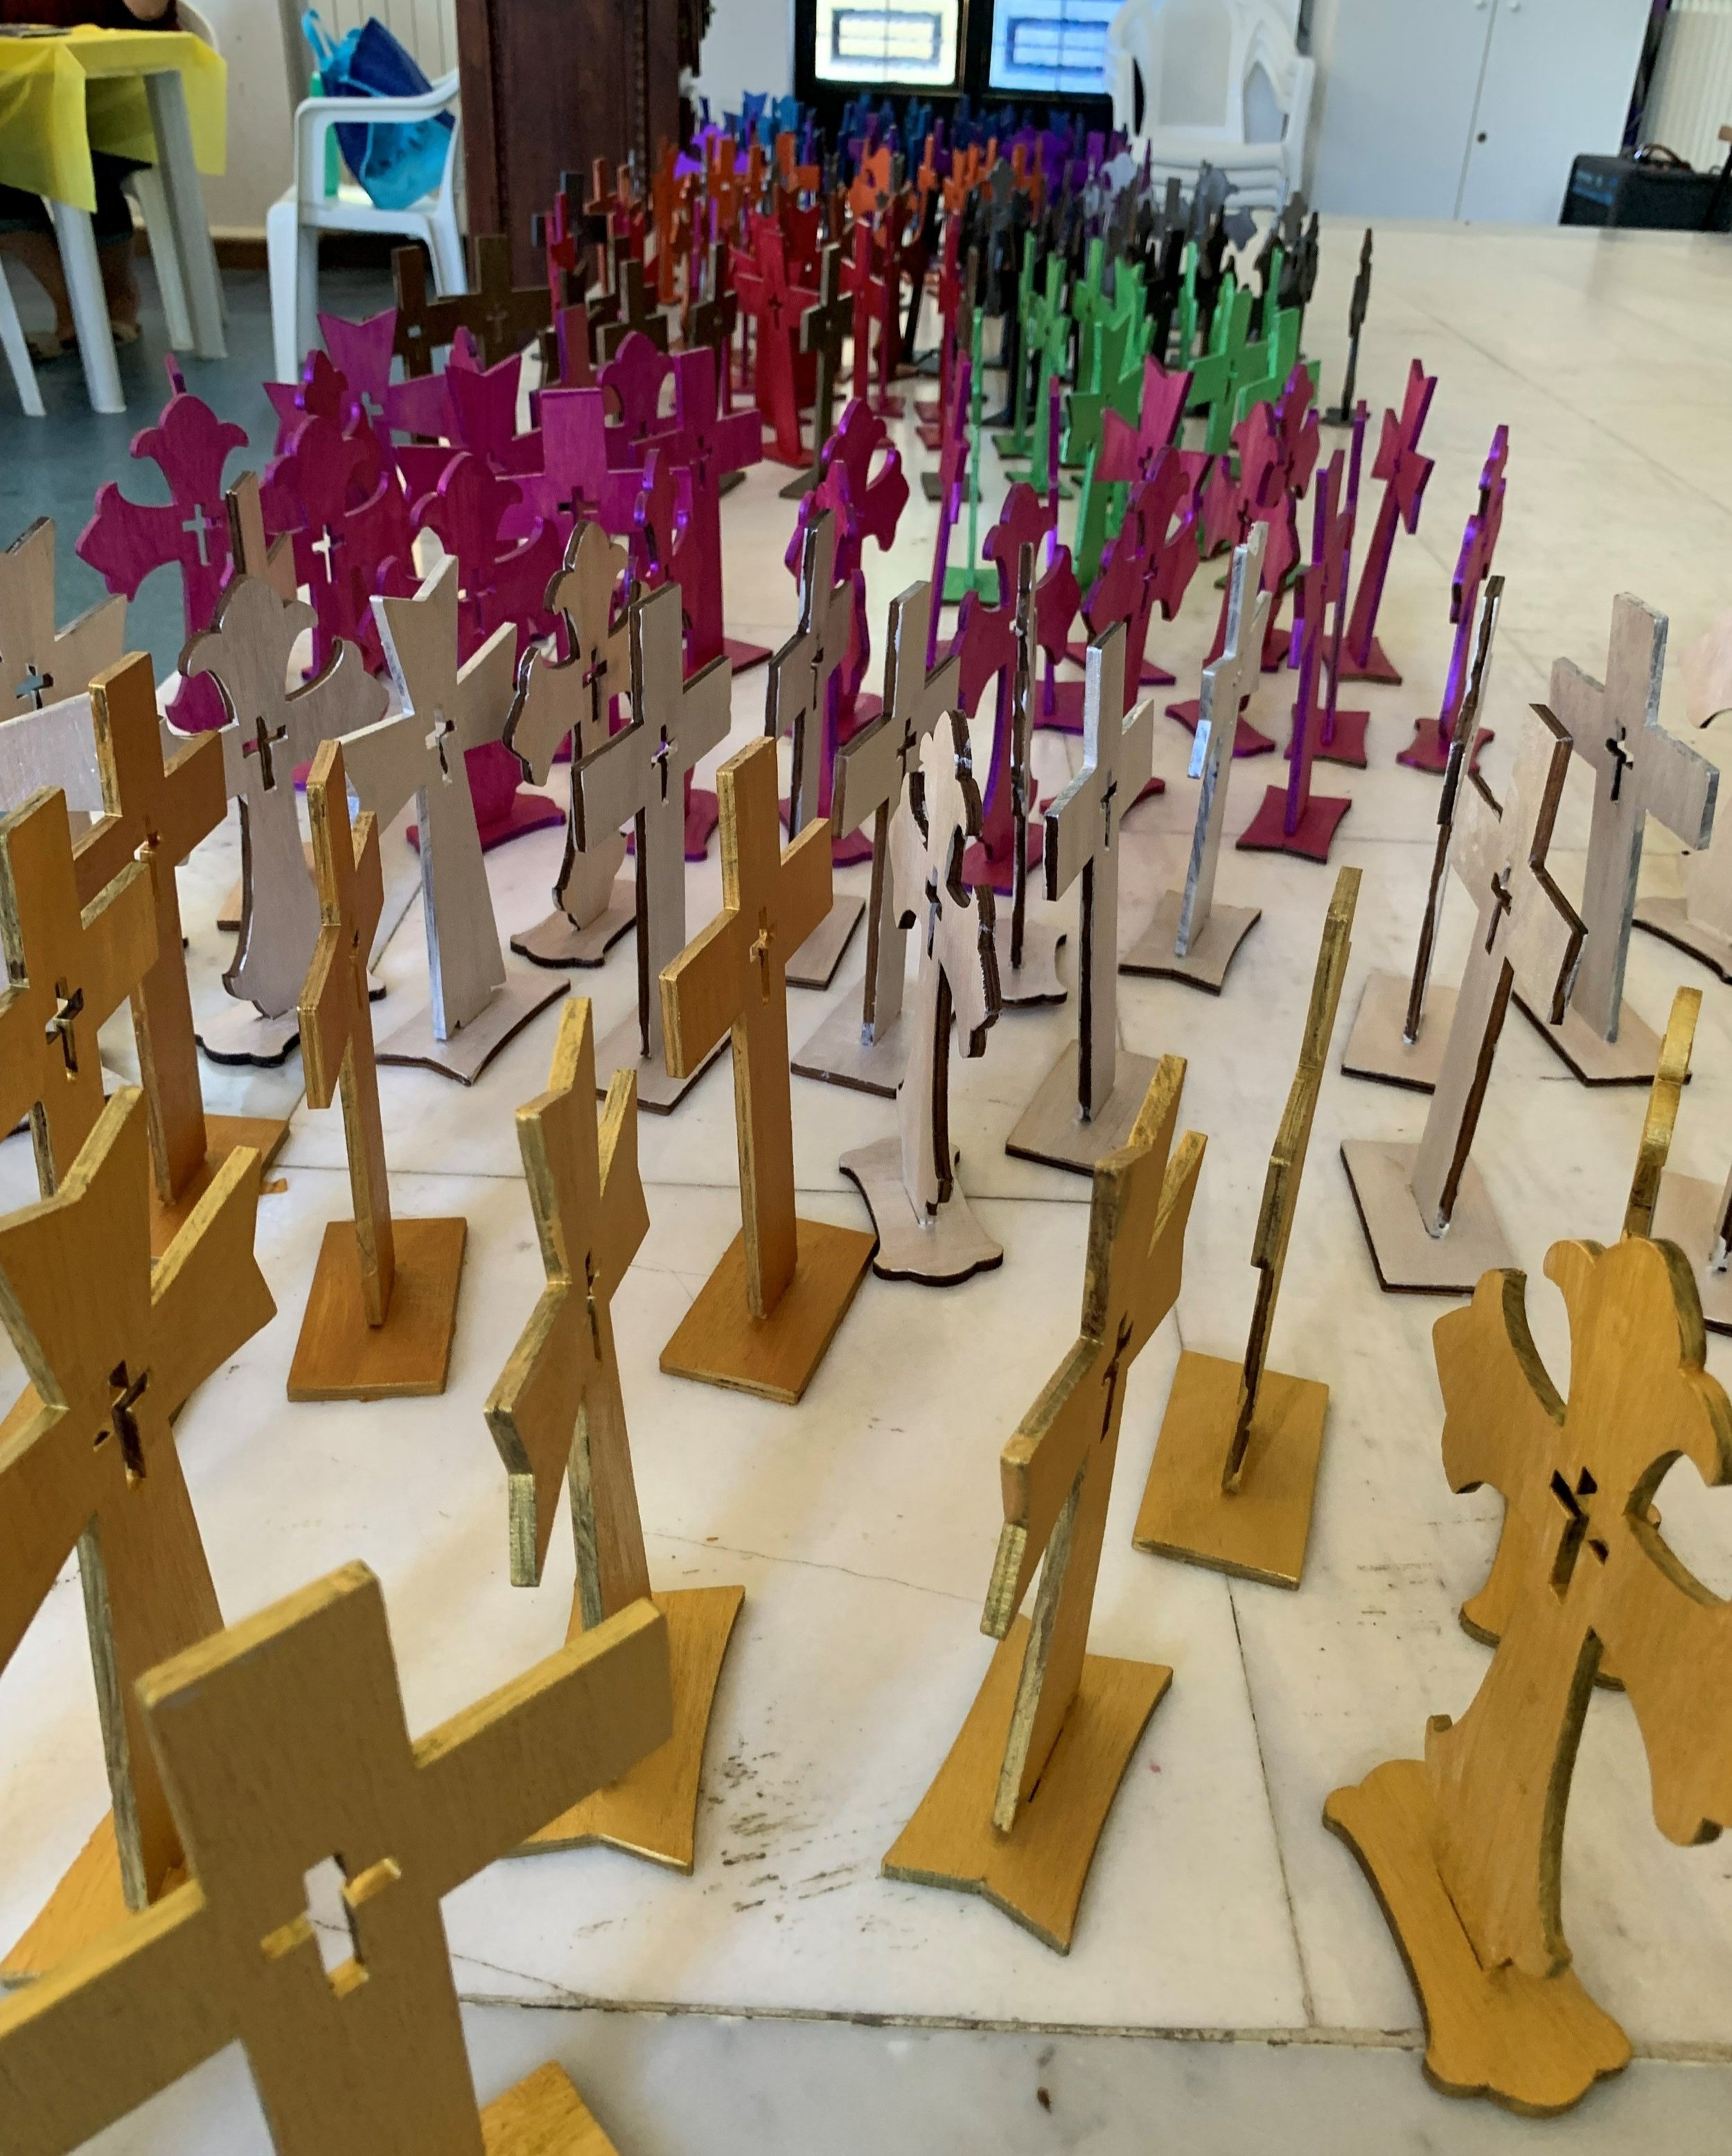   Crosses ready to be decorated by the ladies for their craft project  